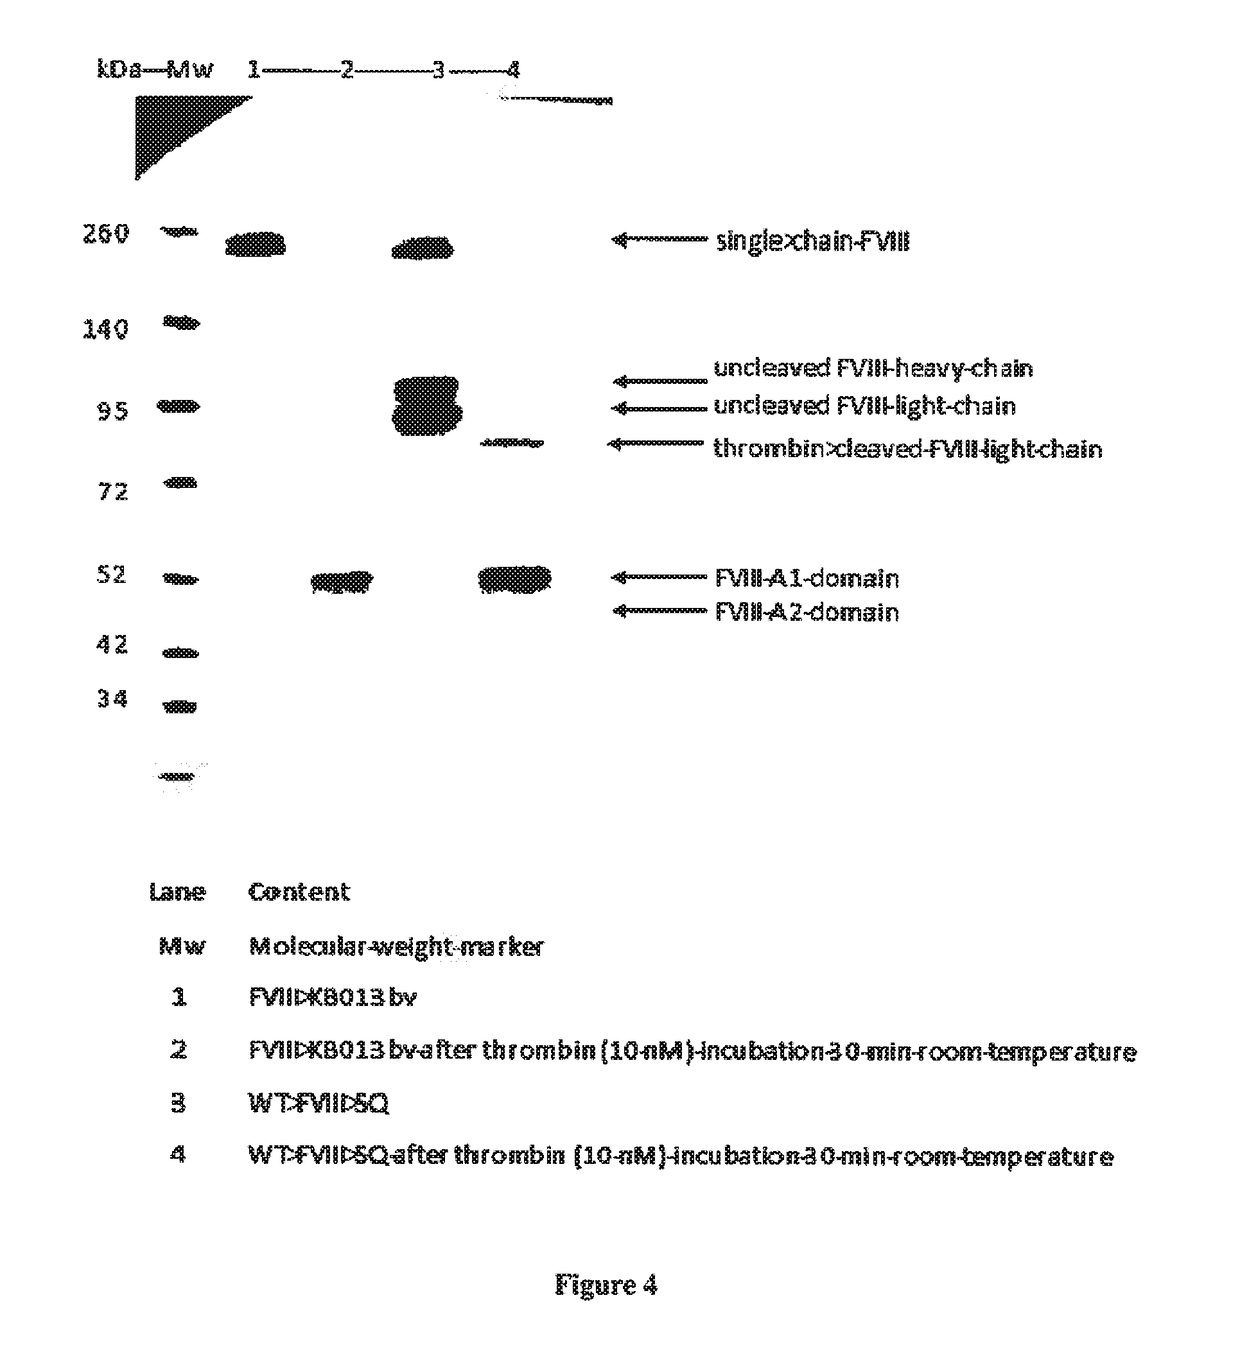 Anti-vwf d'd3 single-domain antibodies and polypeptides comprising thereof